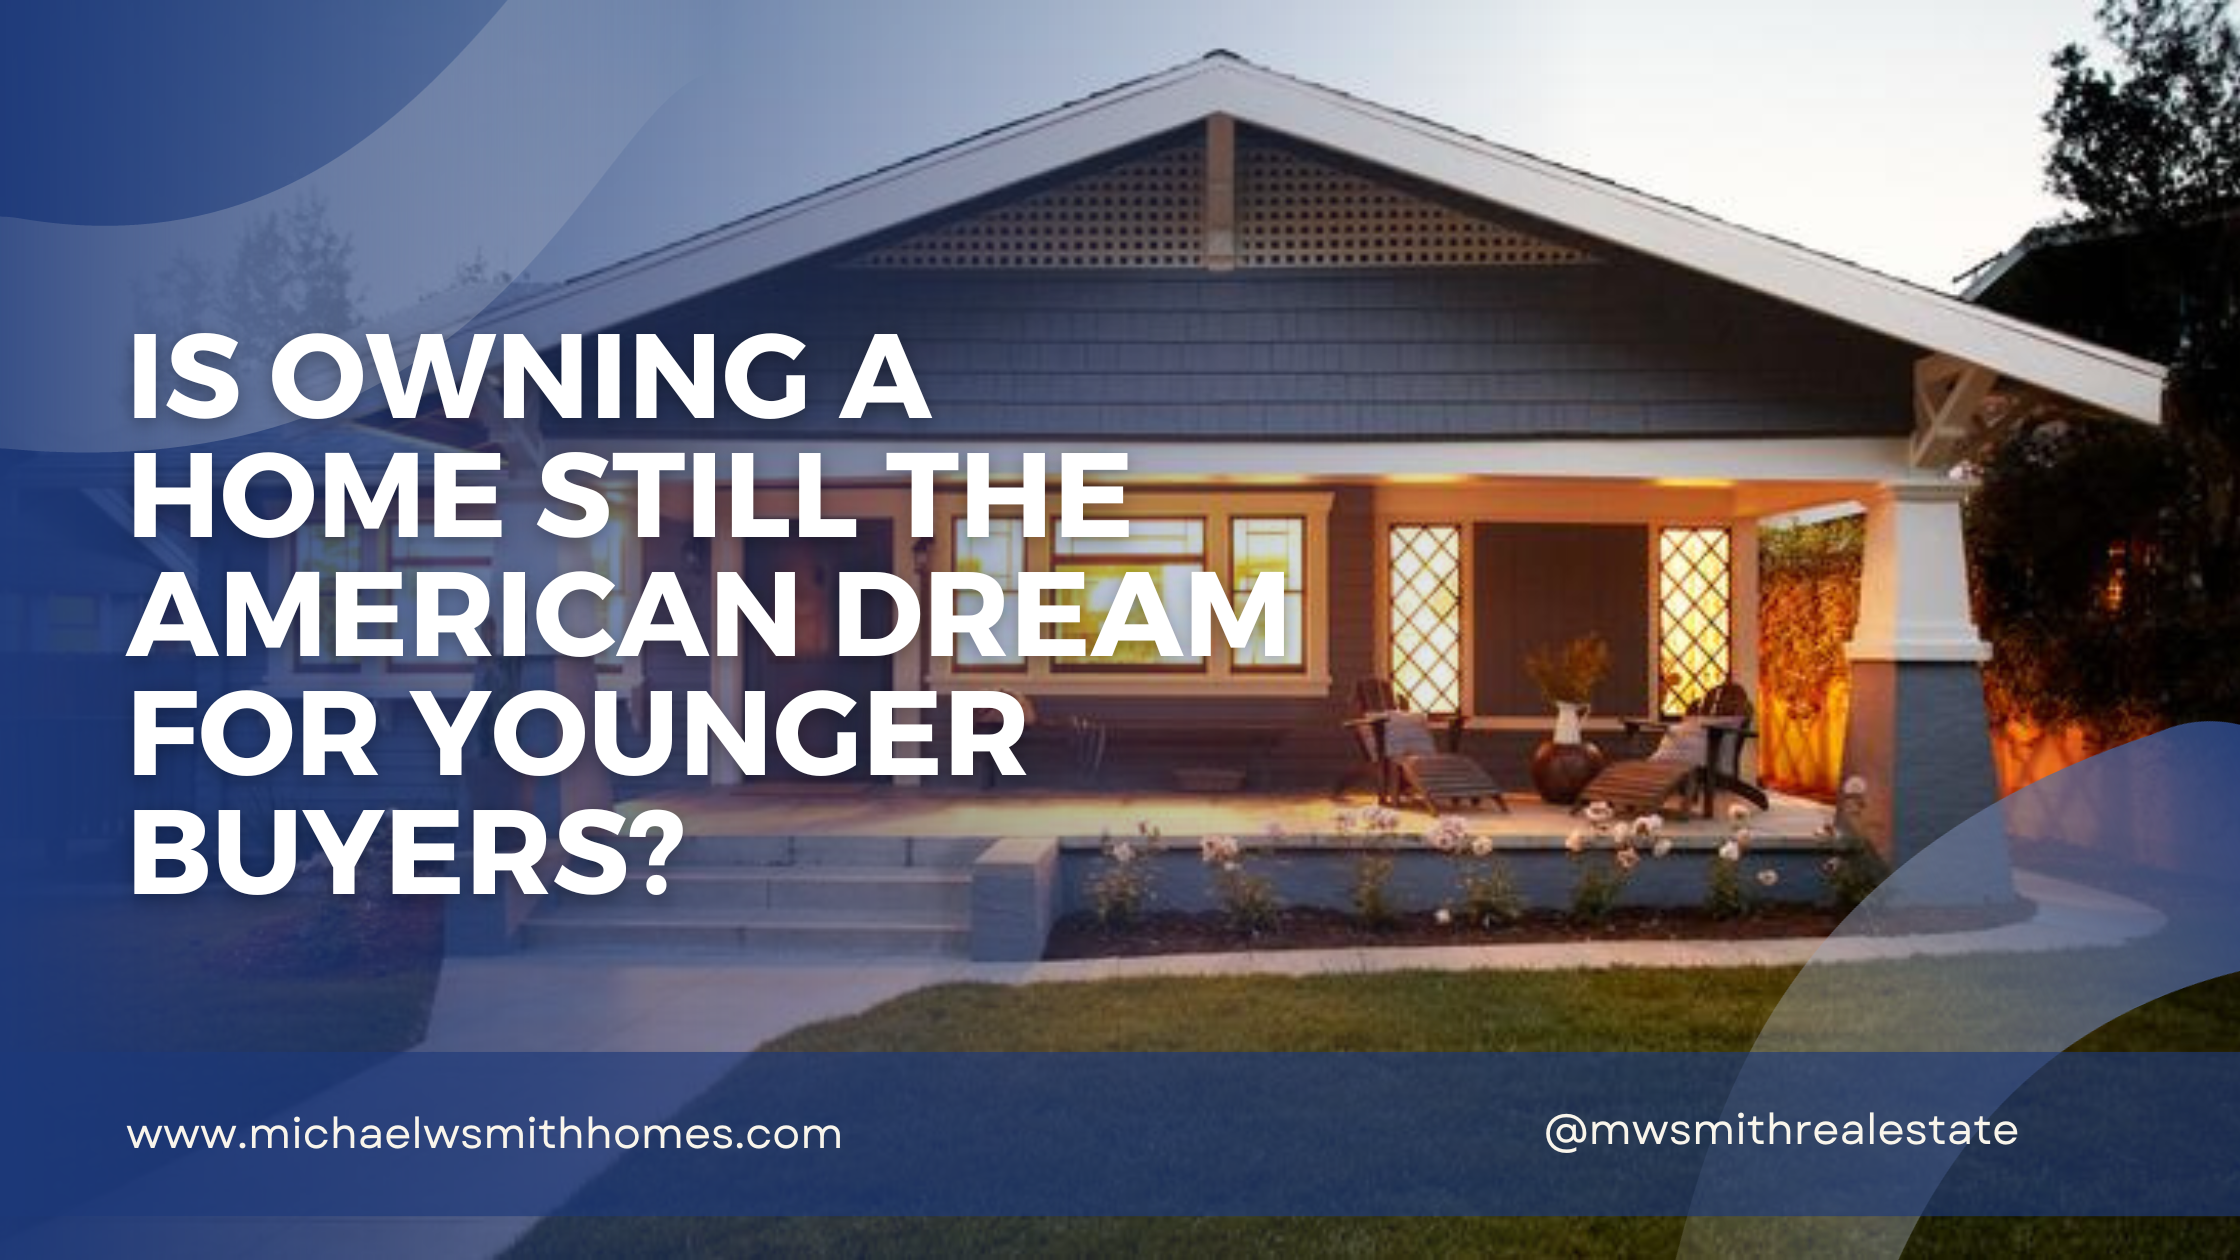 Is Owning a Home Still the American Dream for Younger Buyers?